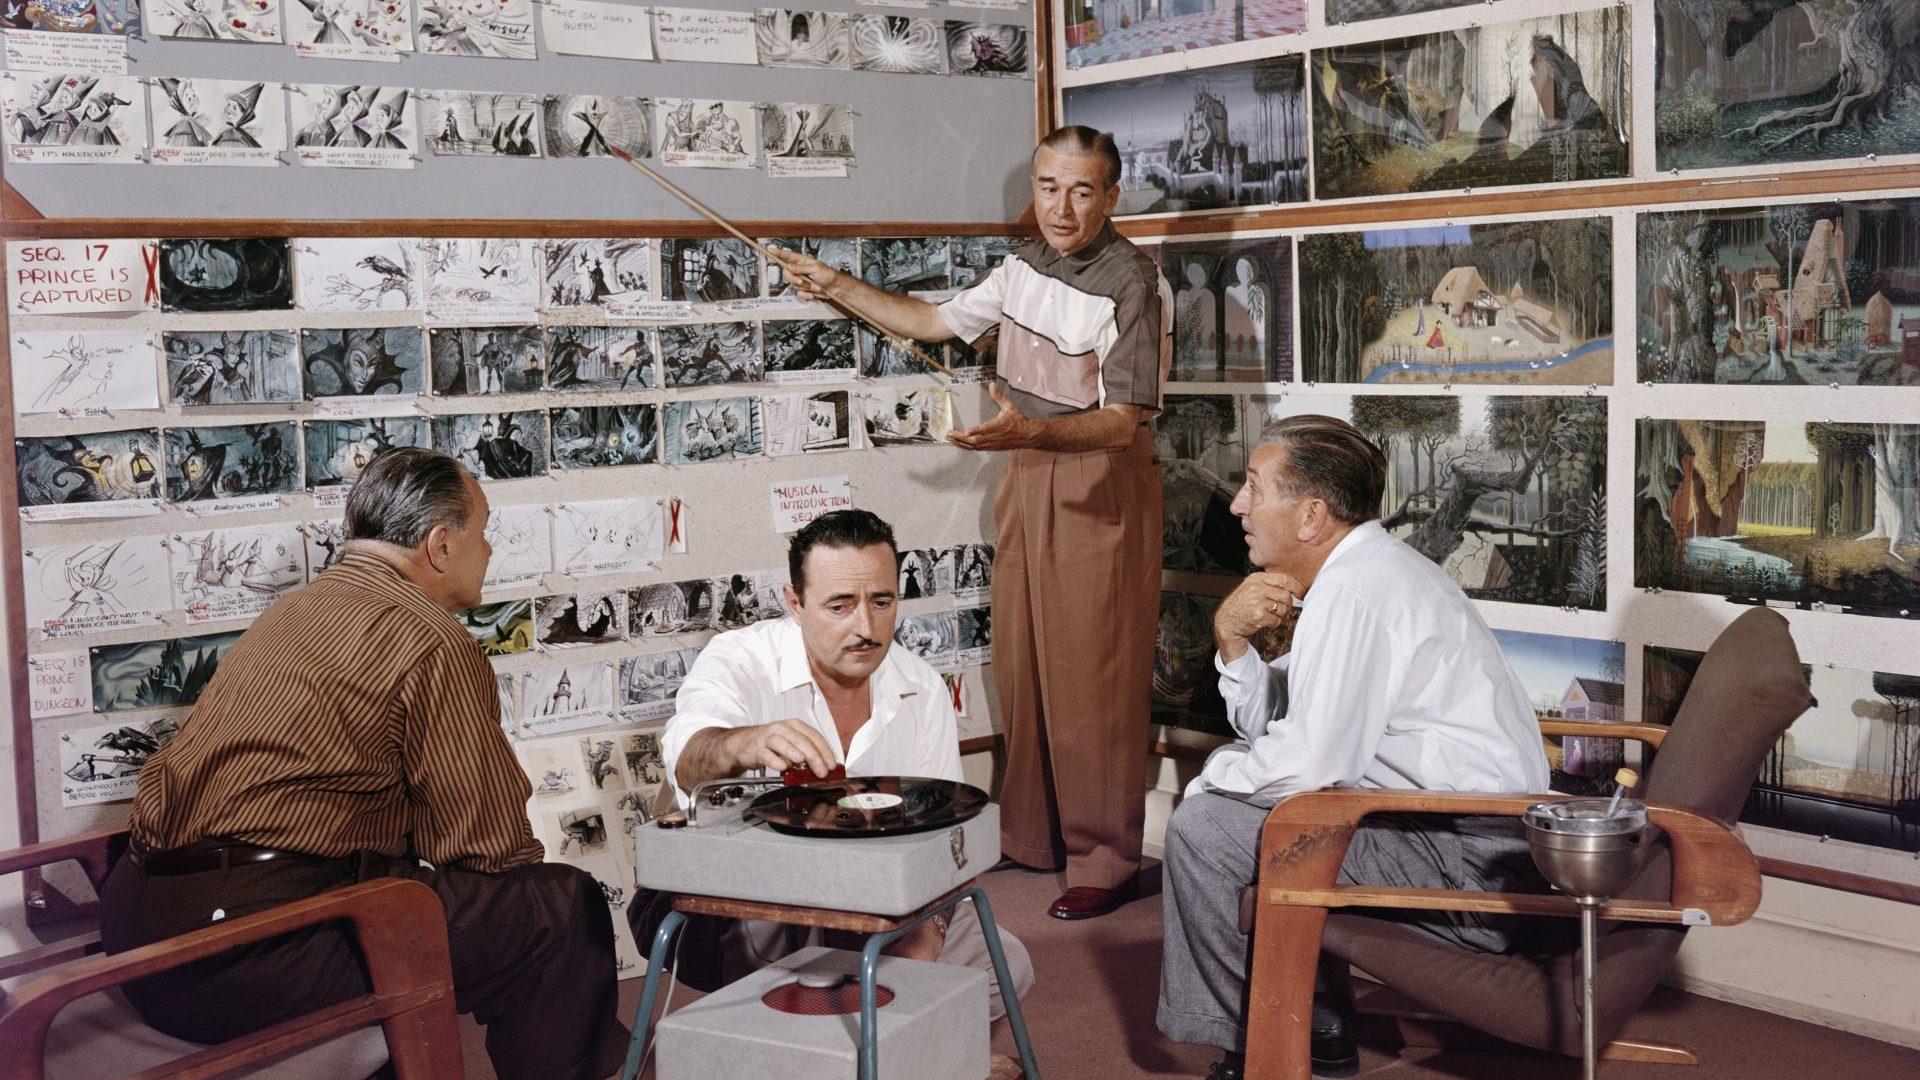 California, 1950s: Walt Disney (right) listens to an animator talk through the storyboards for the 1959 film Sleeping Beauty. Beside them, animator Les Clark plays a record while a fourth man listens. Photo: Gene Lester/Getty